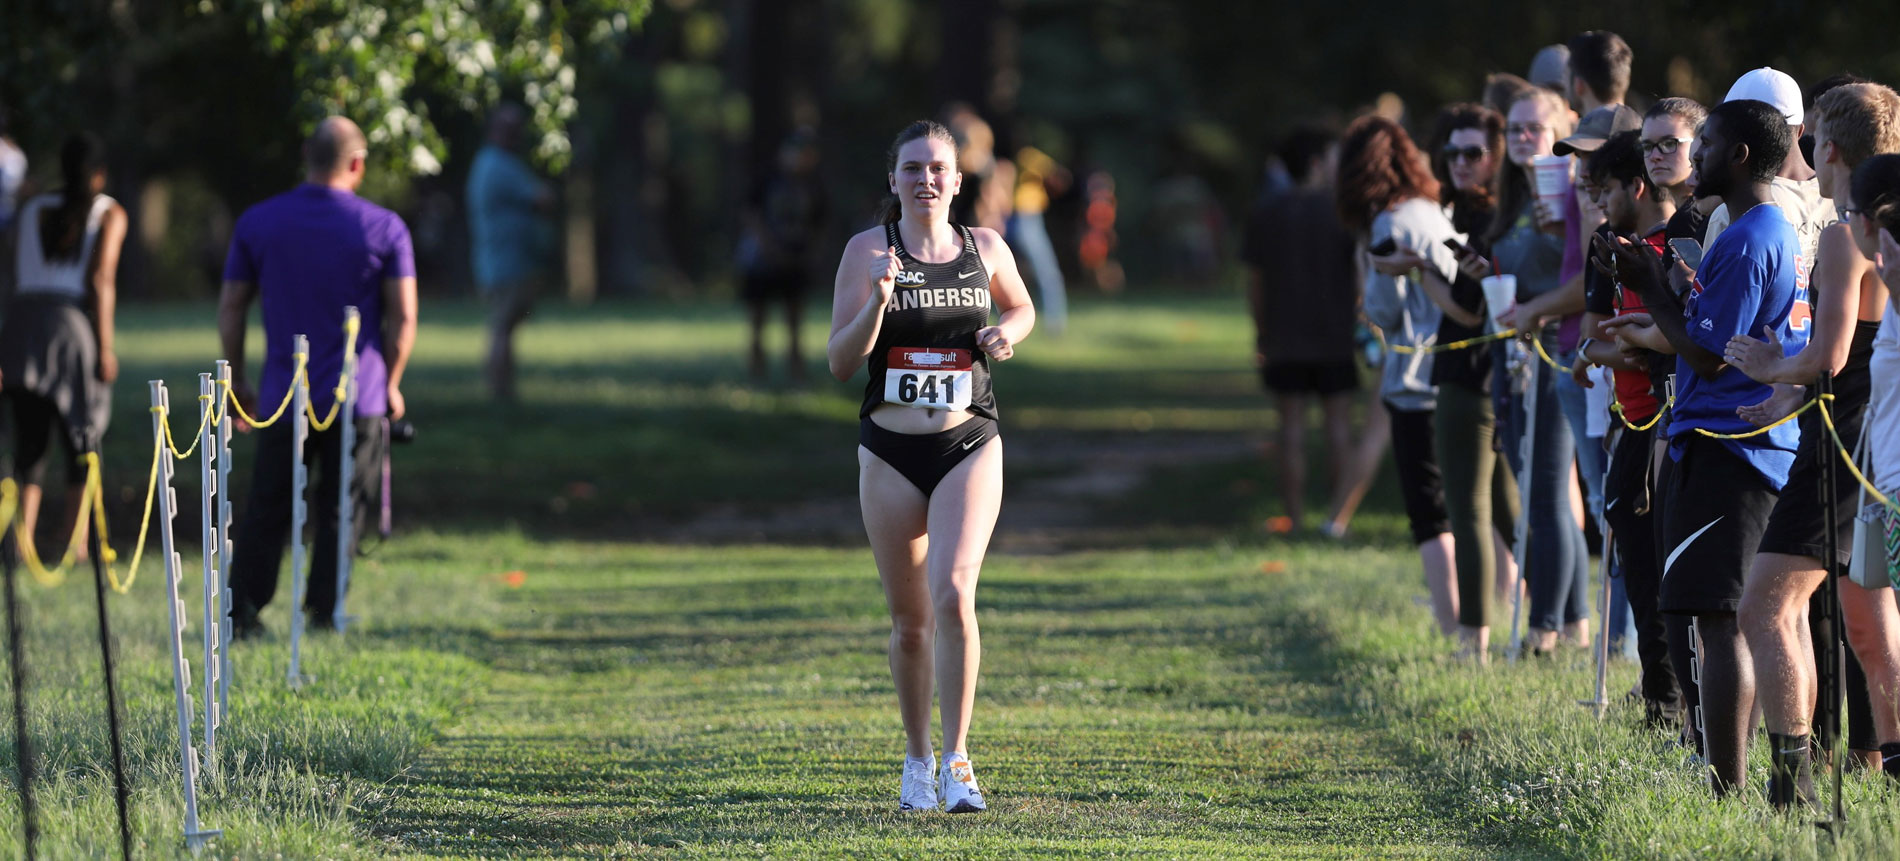 Women’s Cross Country Wins Converse Kickoff Classic